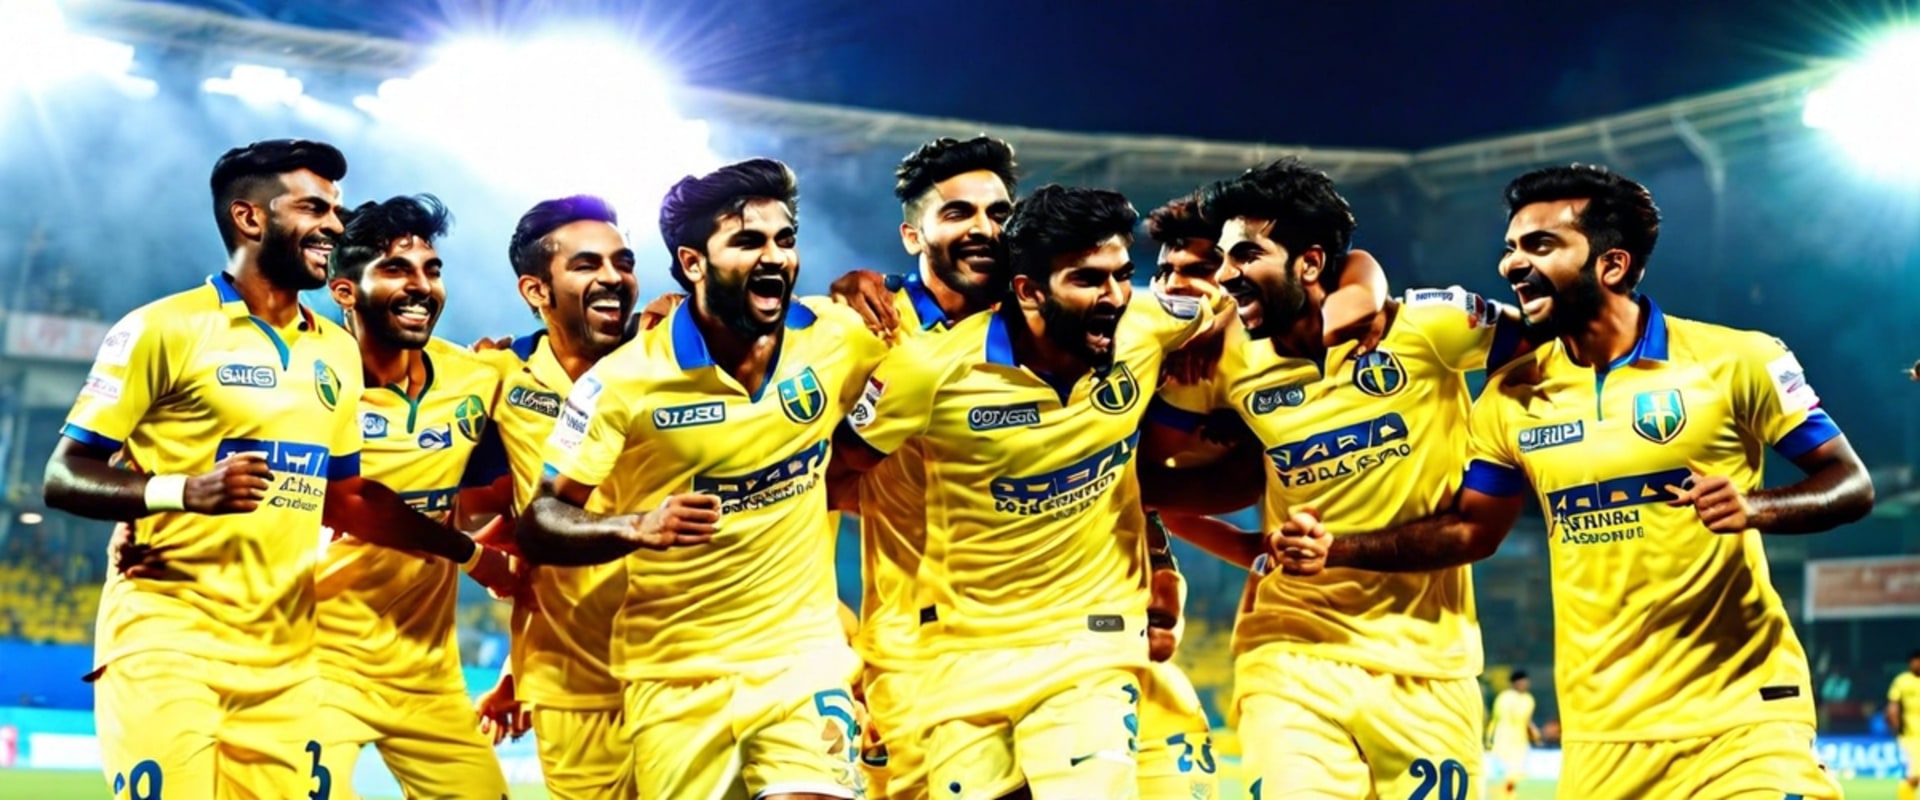 Kerala Blasters: Club Overview, Squad, and Achievements